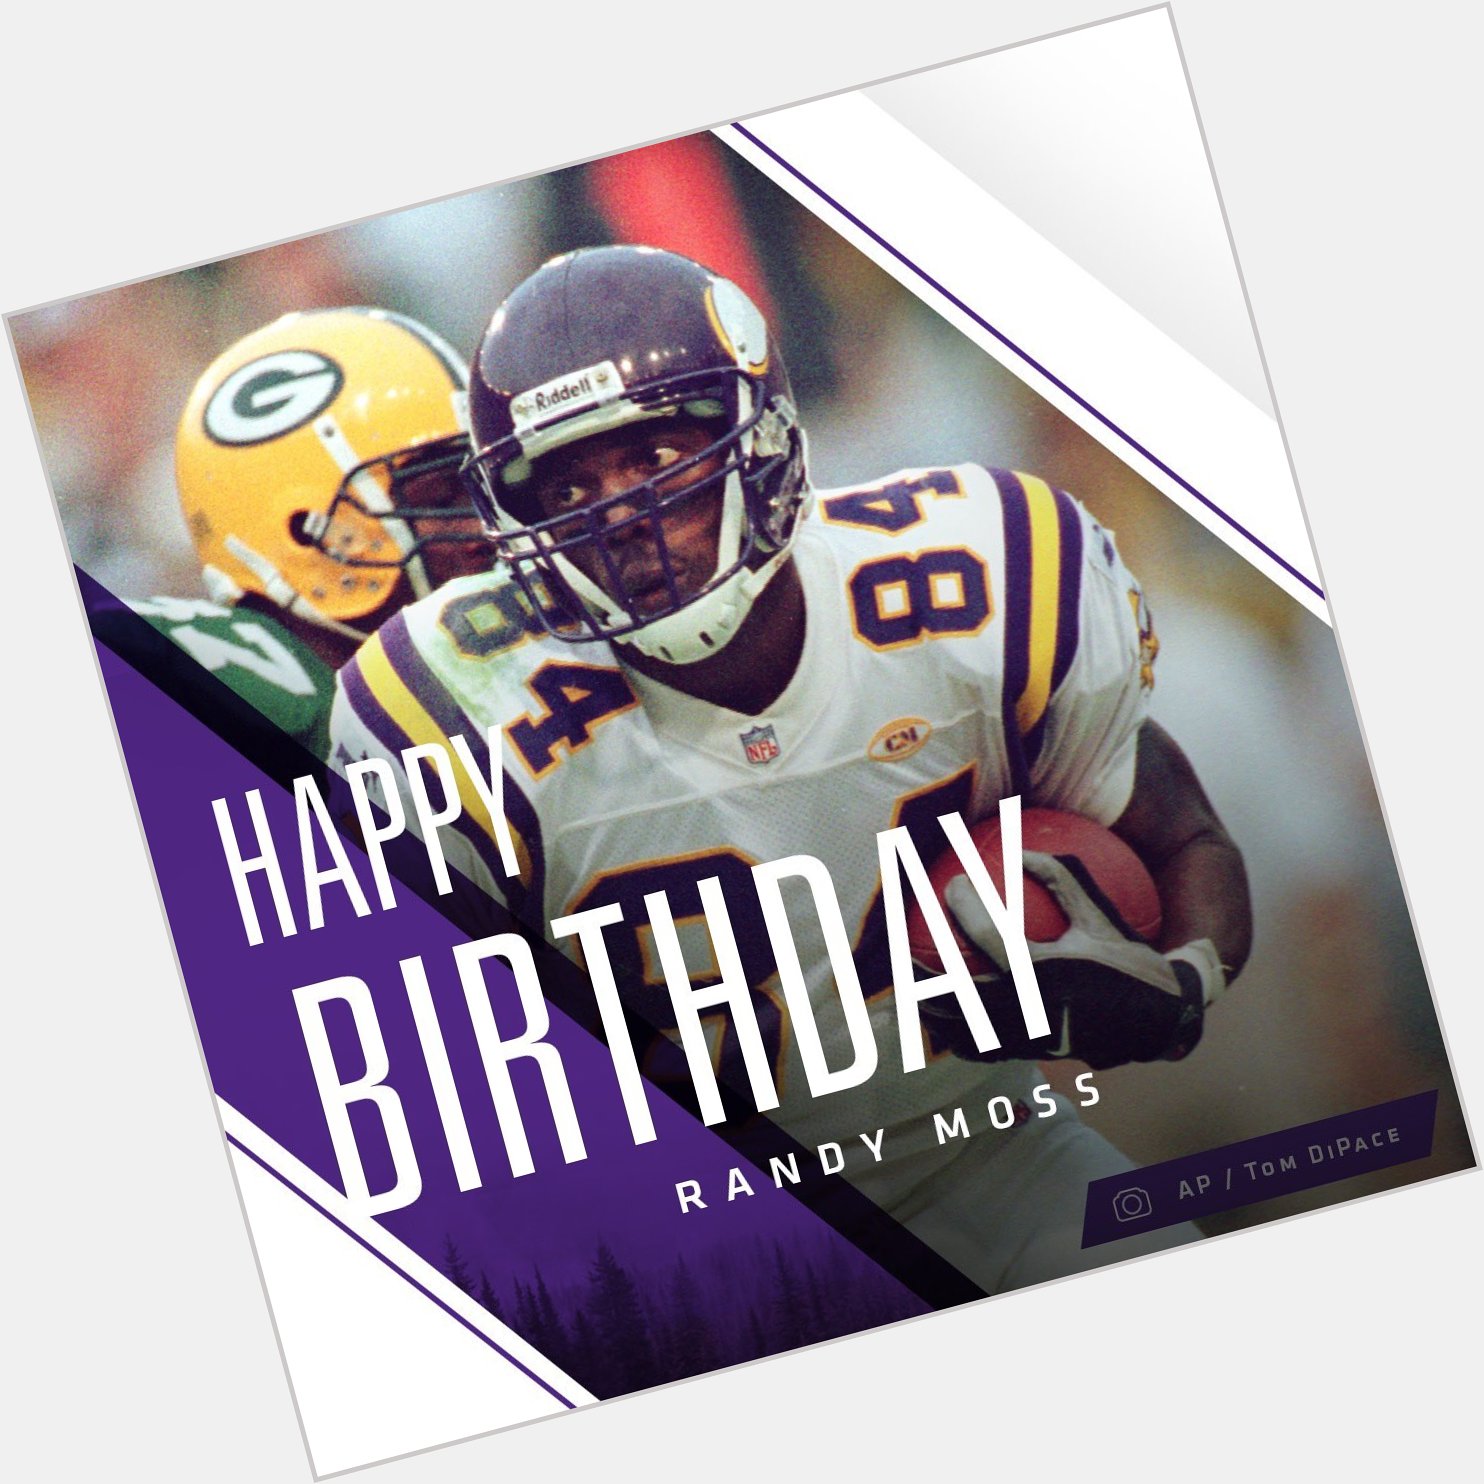 Happy birthday to the main man Randy Moss!

Comment below with your favourite memory of Randy Moss 